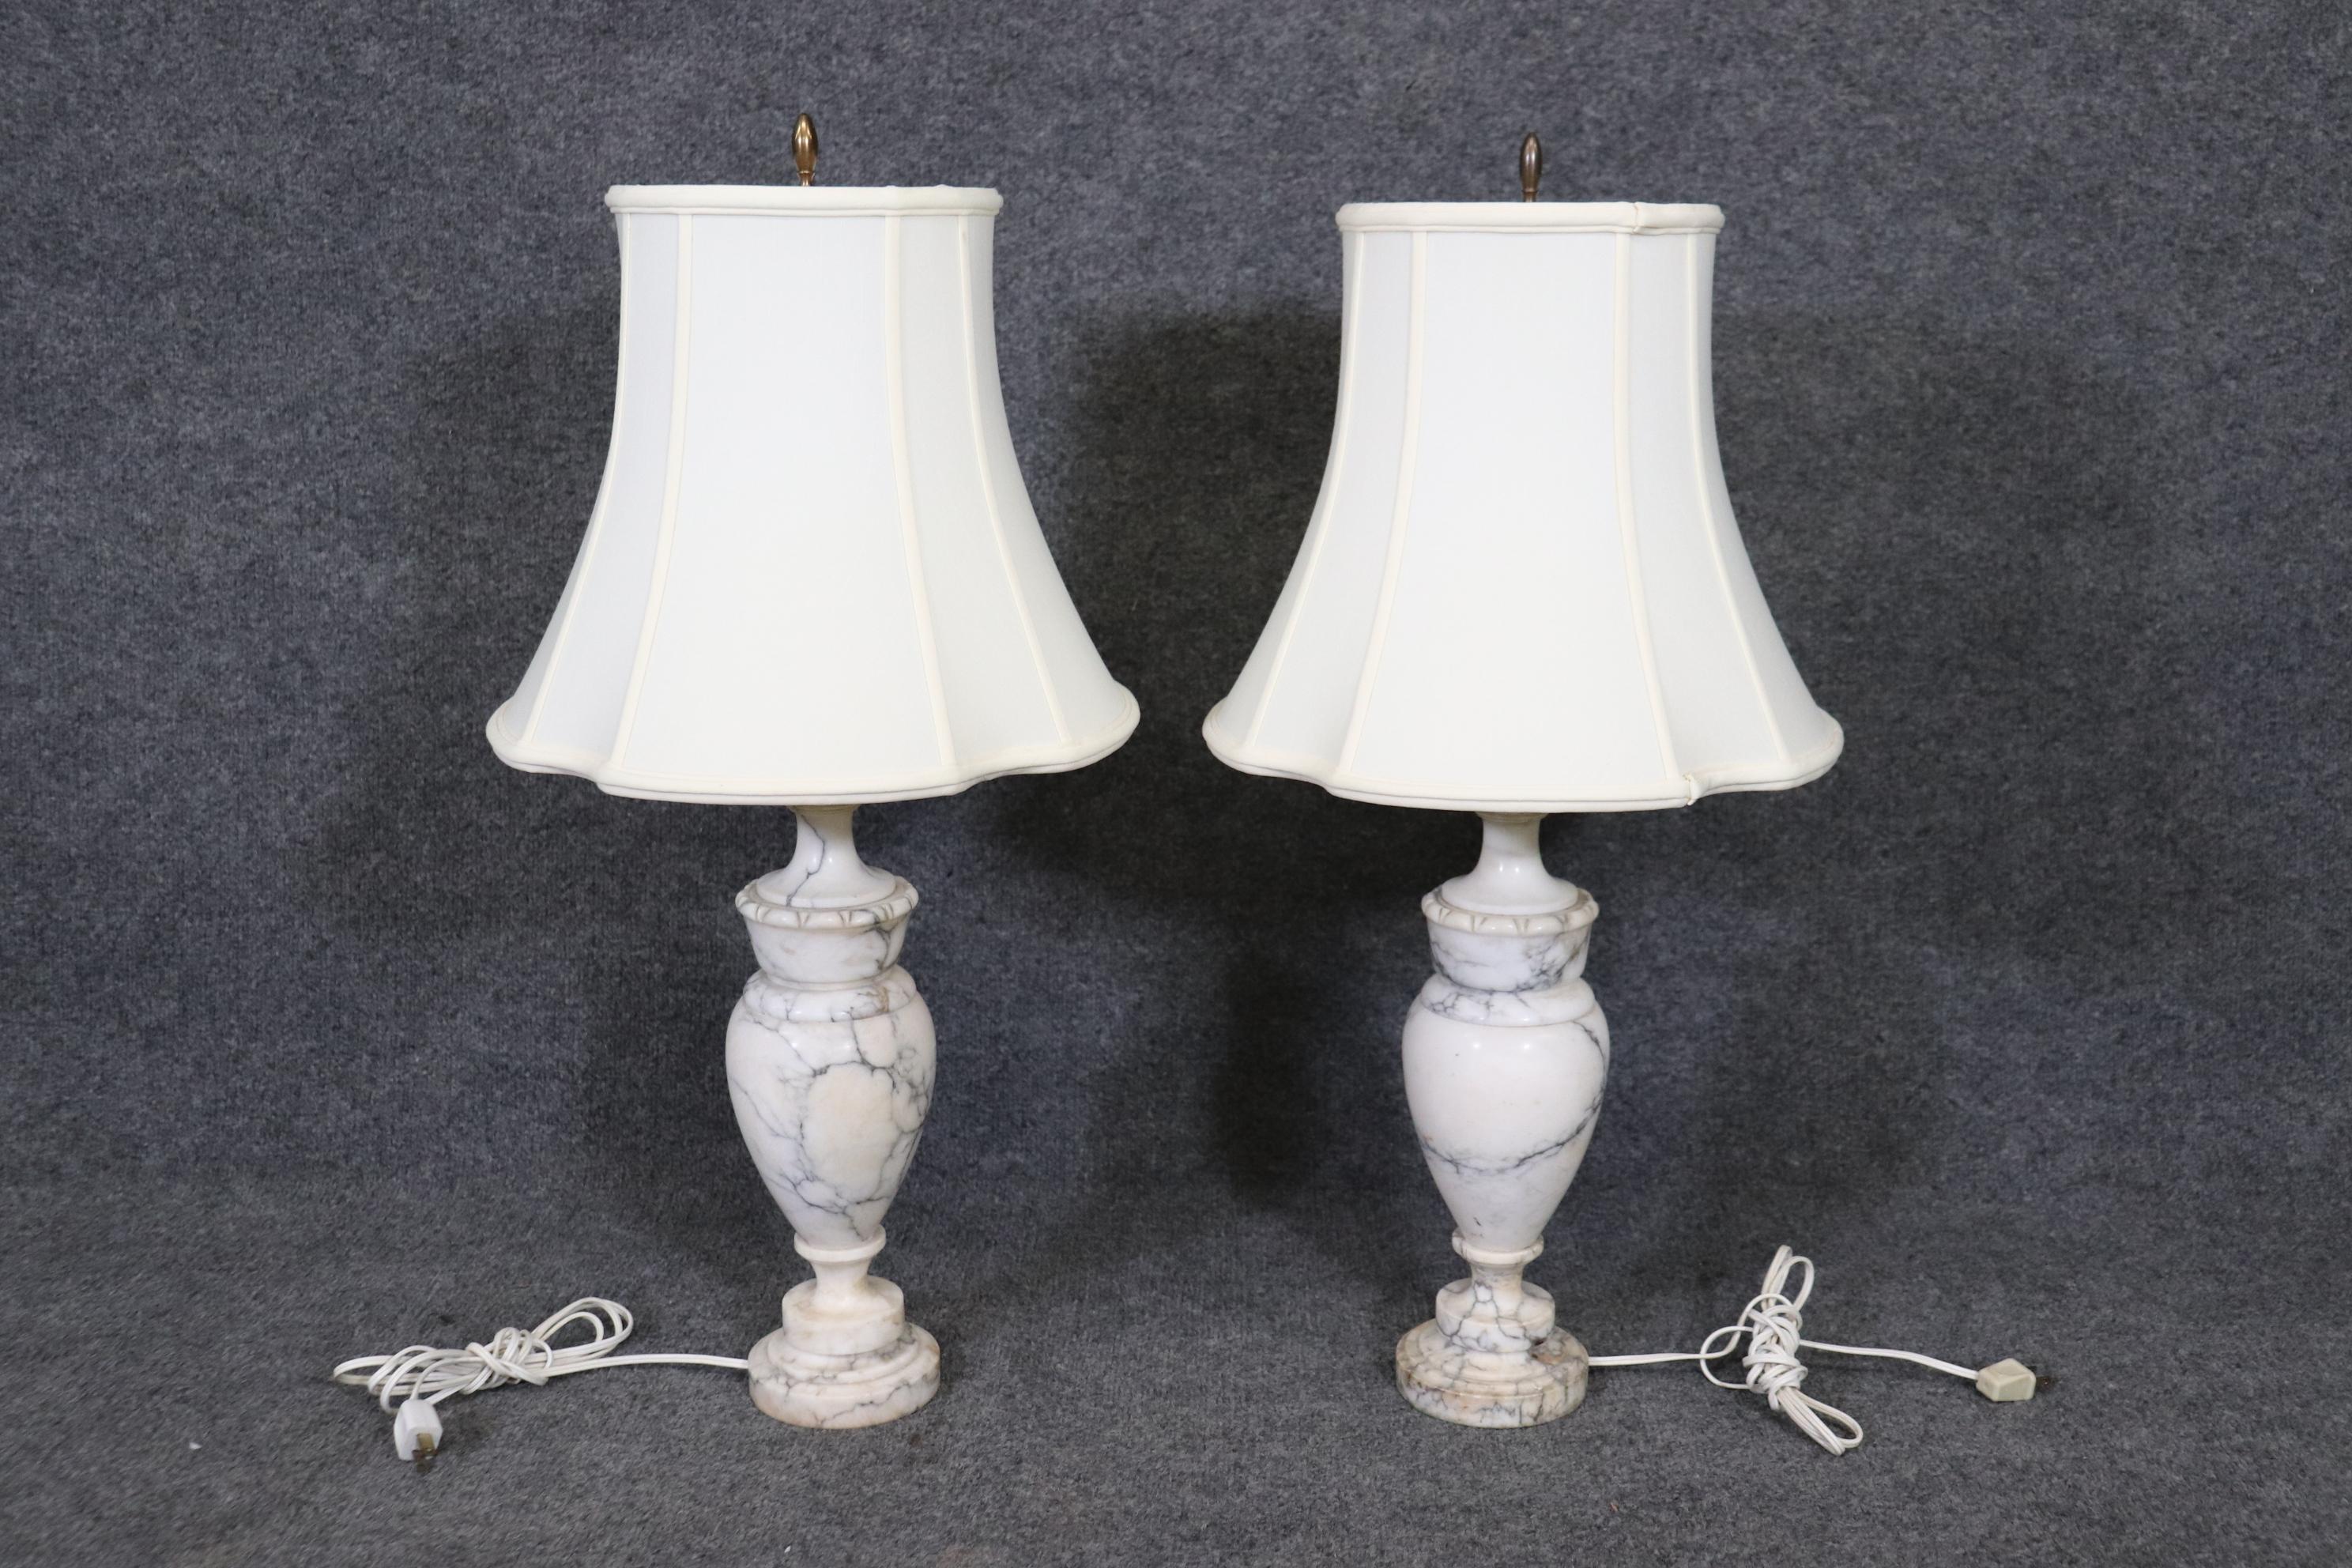 Dimensions: H: 29 1/4in W: 4 3/4in D: 4 3/4in 
Shade Dimension: W: 16 1/4in D: 14in 
This Pair of Italian Grand Tour Style Carrara Marble Table Lamps are truly made if the highest quality! This pair is made of Carrara Marble which is a super rare